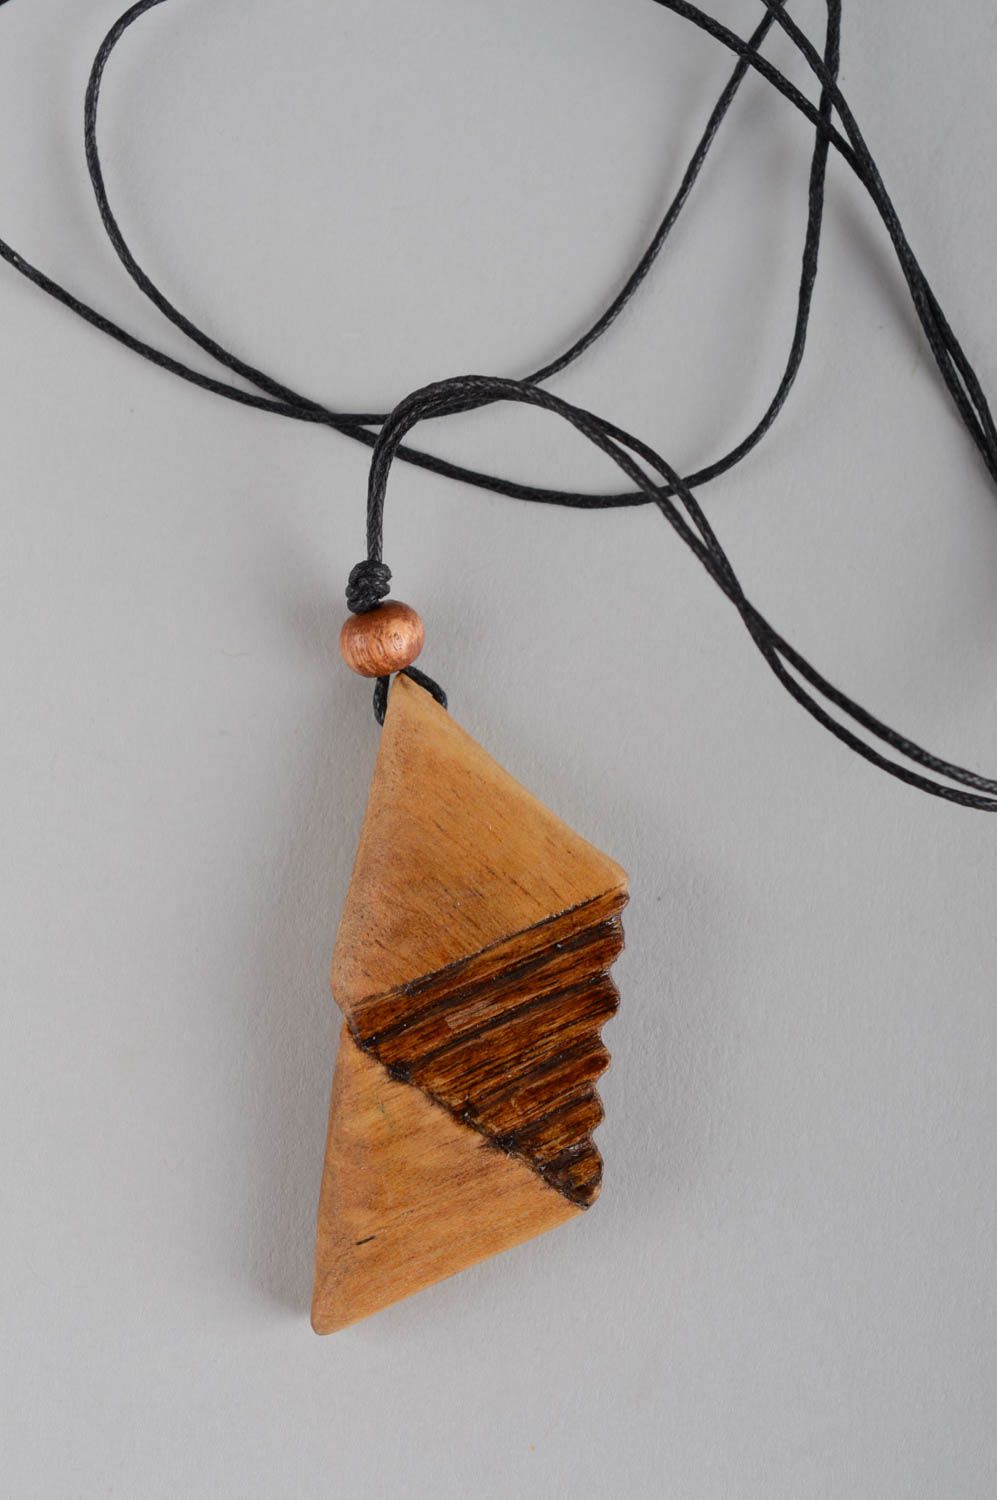 Stylish handmade wooden pendant artisan jewelry designs wood craft gifts for her photo 7